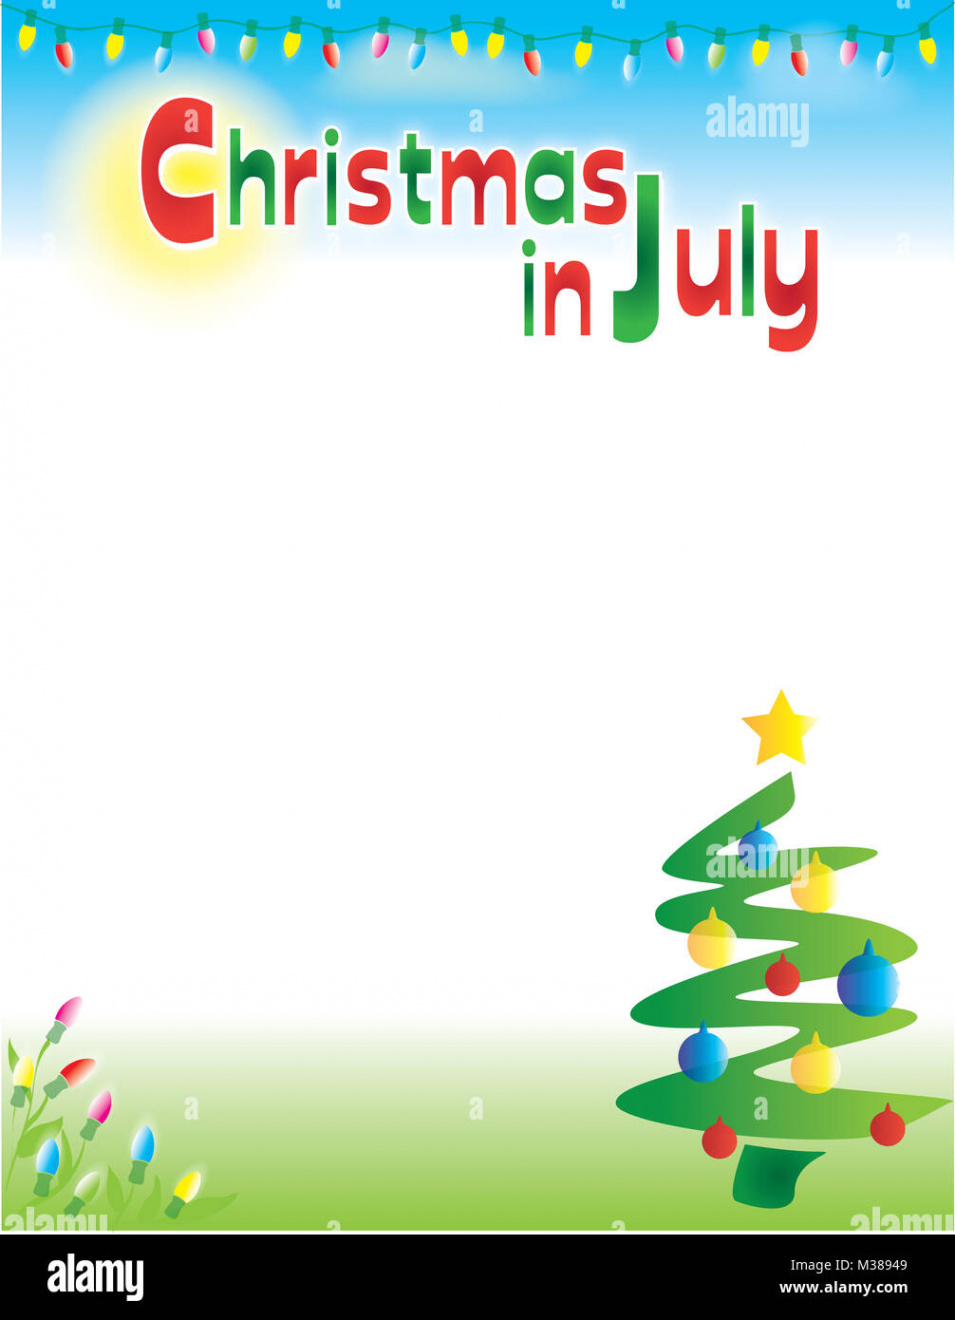 Christmas in July Background Template Stock Photo - Alamy